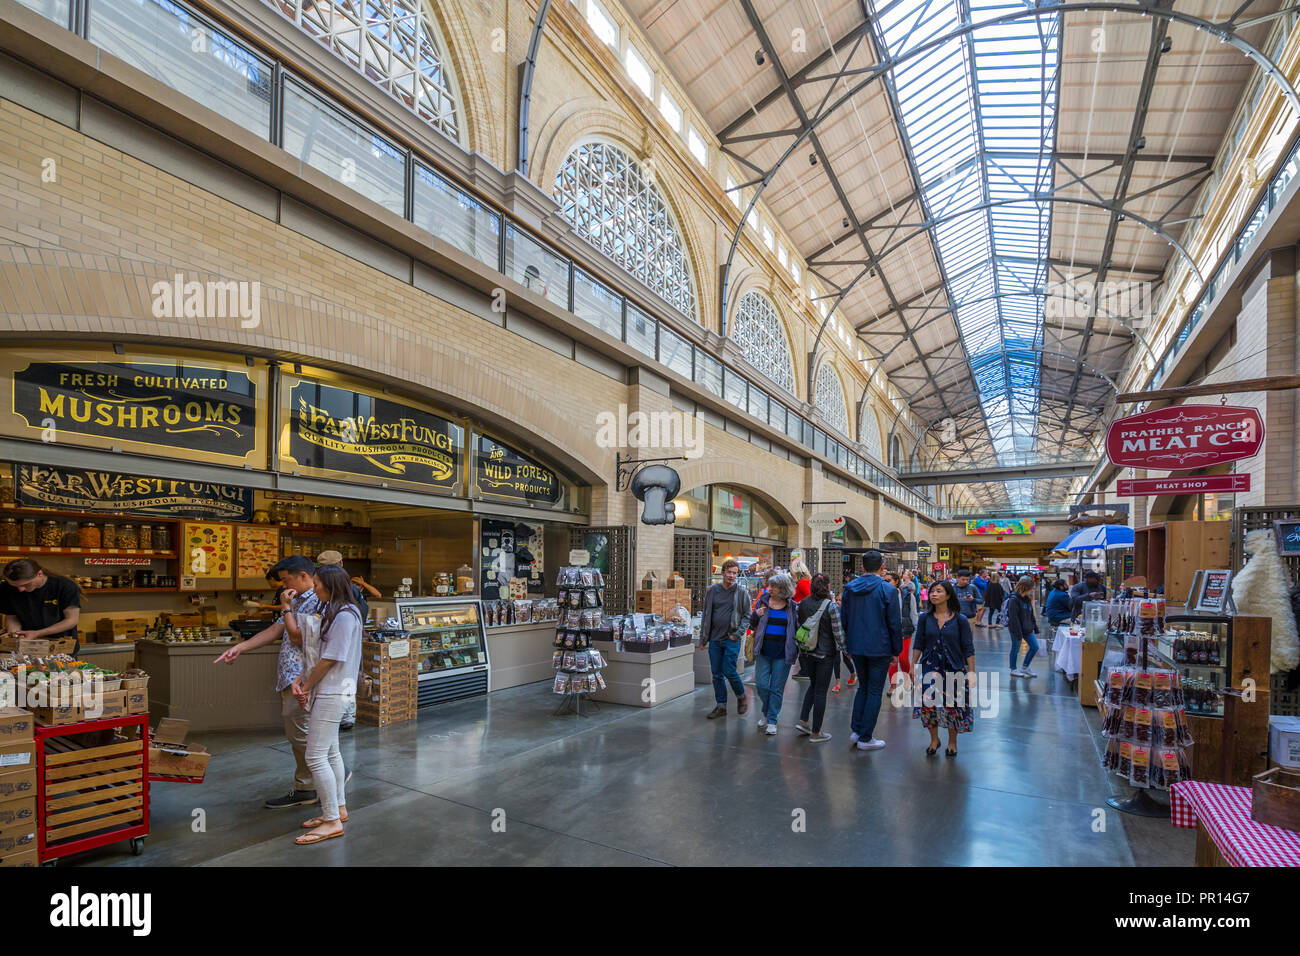 Interior of the Ferry Building Marketplace on the Embarcadero, San Francisco, California, United States of America, North America Stock Photo